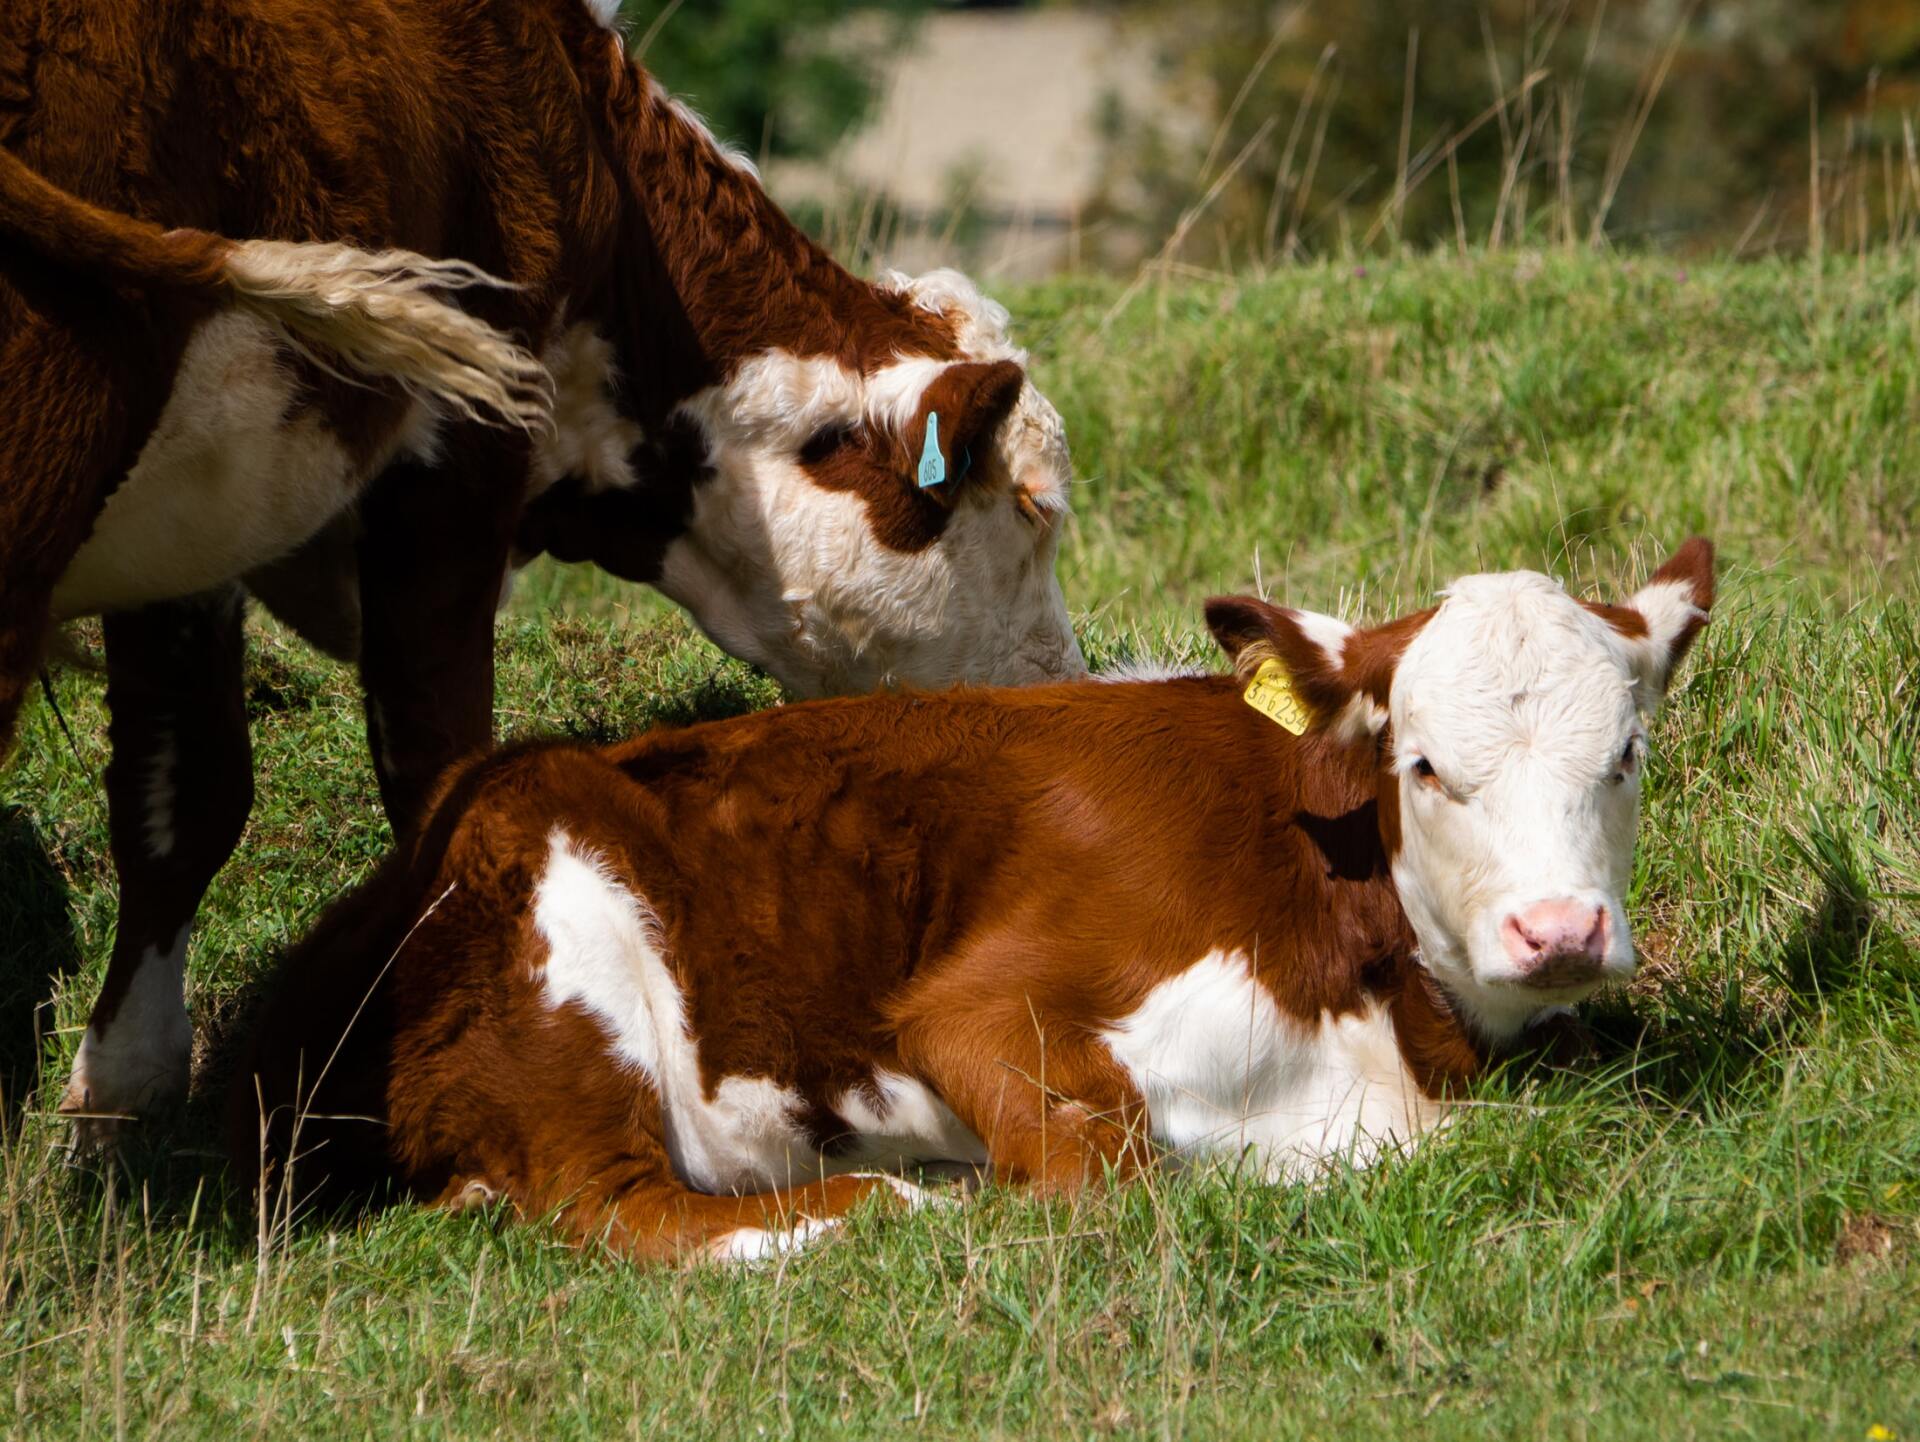 a brown and white calf with a yellow tag on its ear